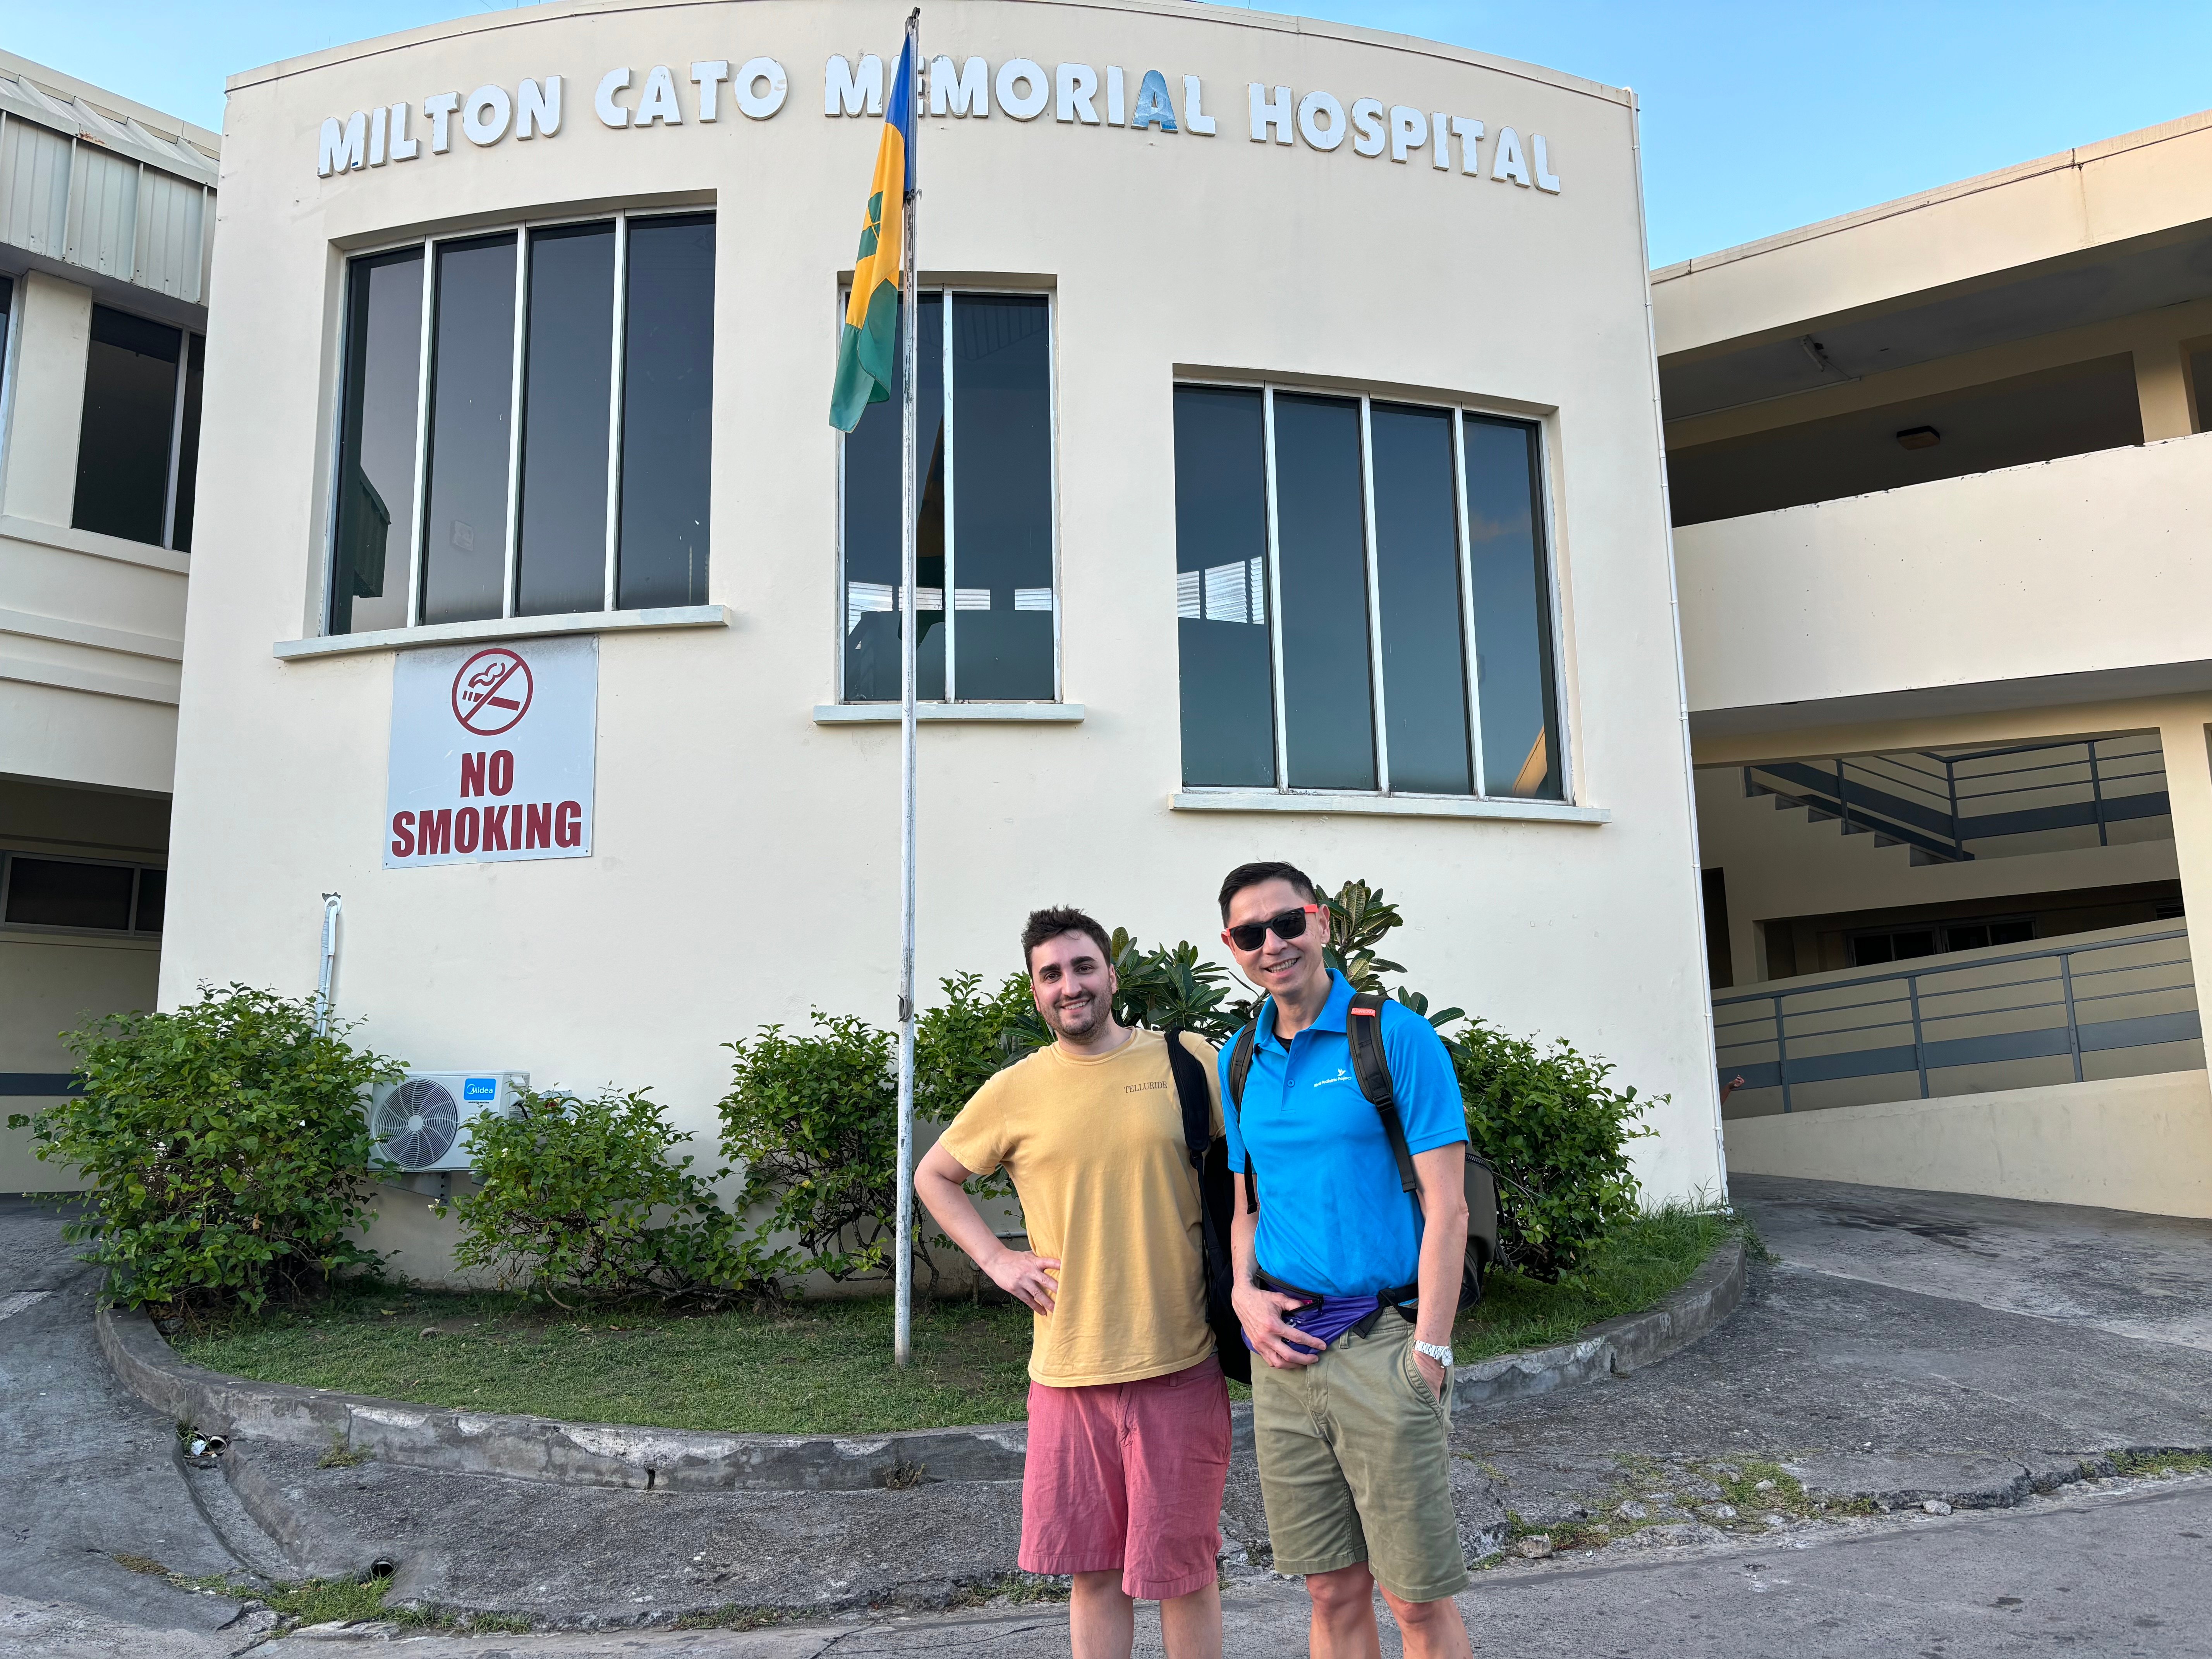 Two fellows pose in front of a hospital